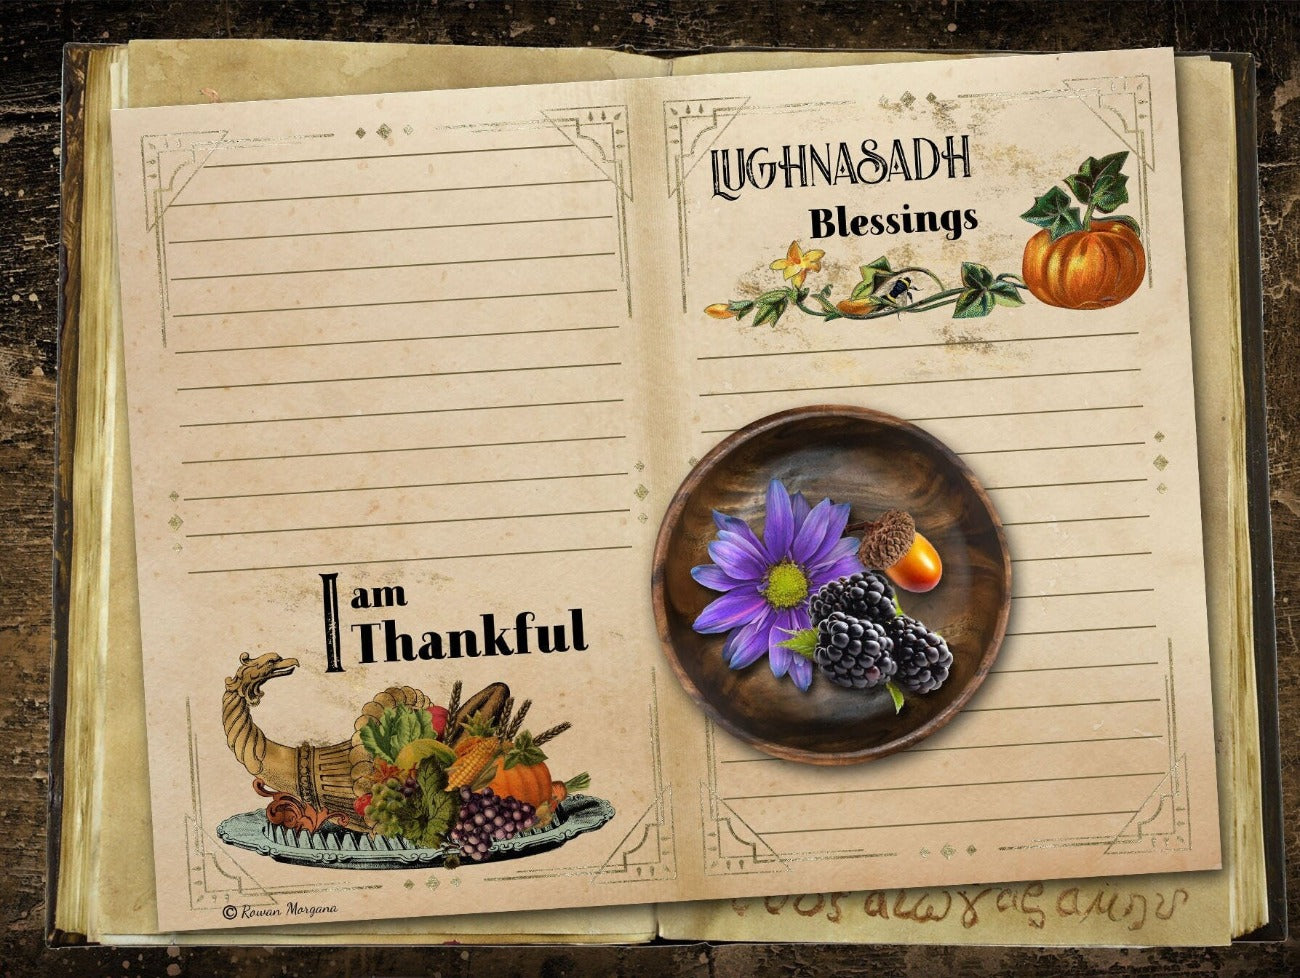 Be Thankful and Lughnasadh Blessings - LUGHNASADH JUNK JOURNAL Kit Printable Pages - Morgana Magick Spell